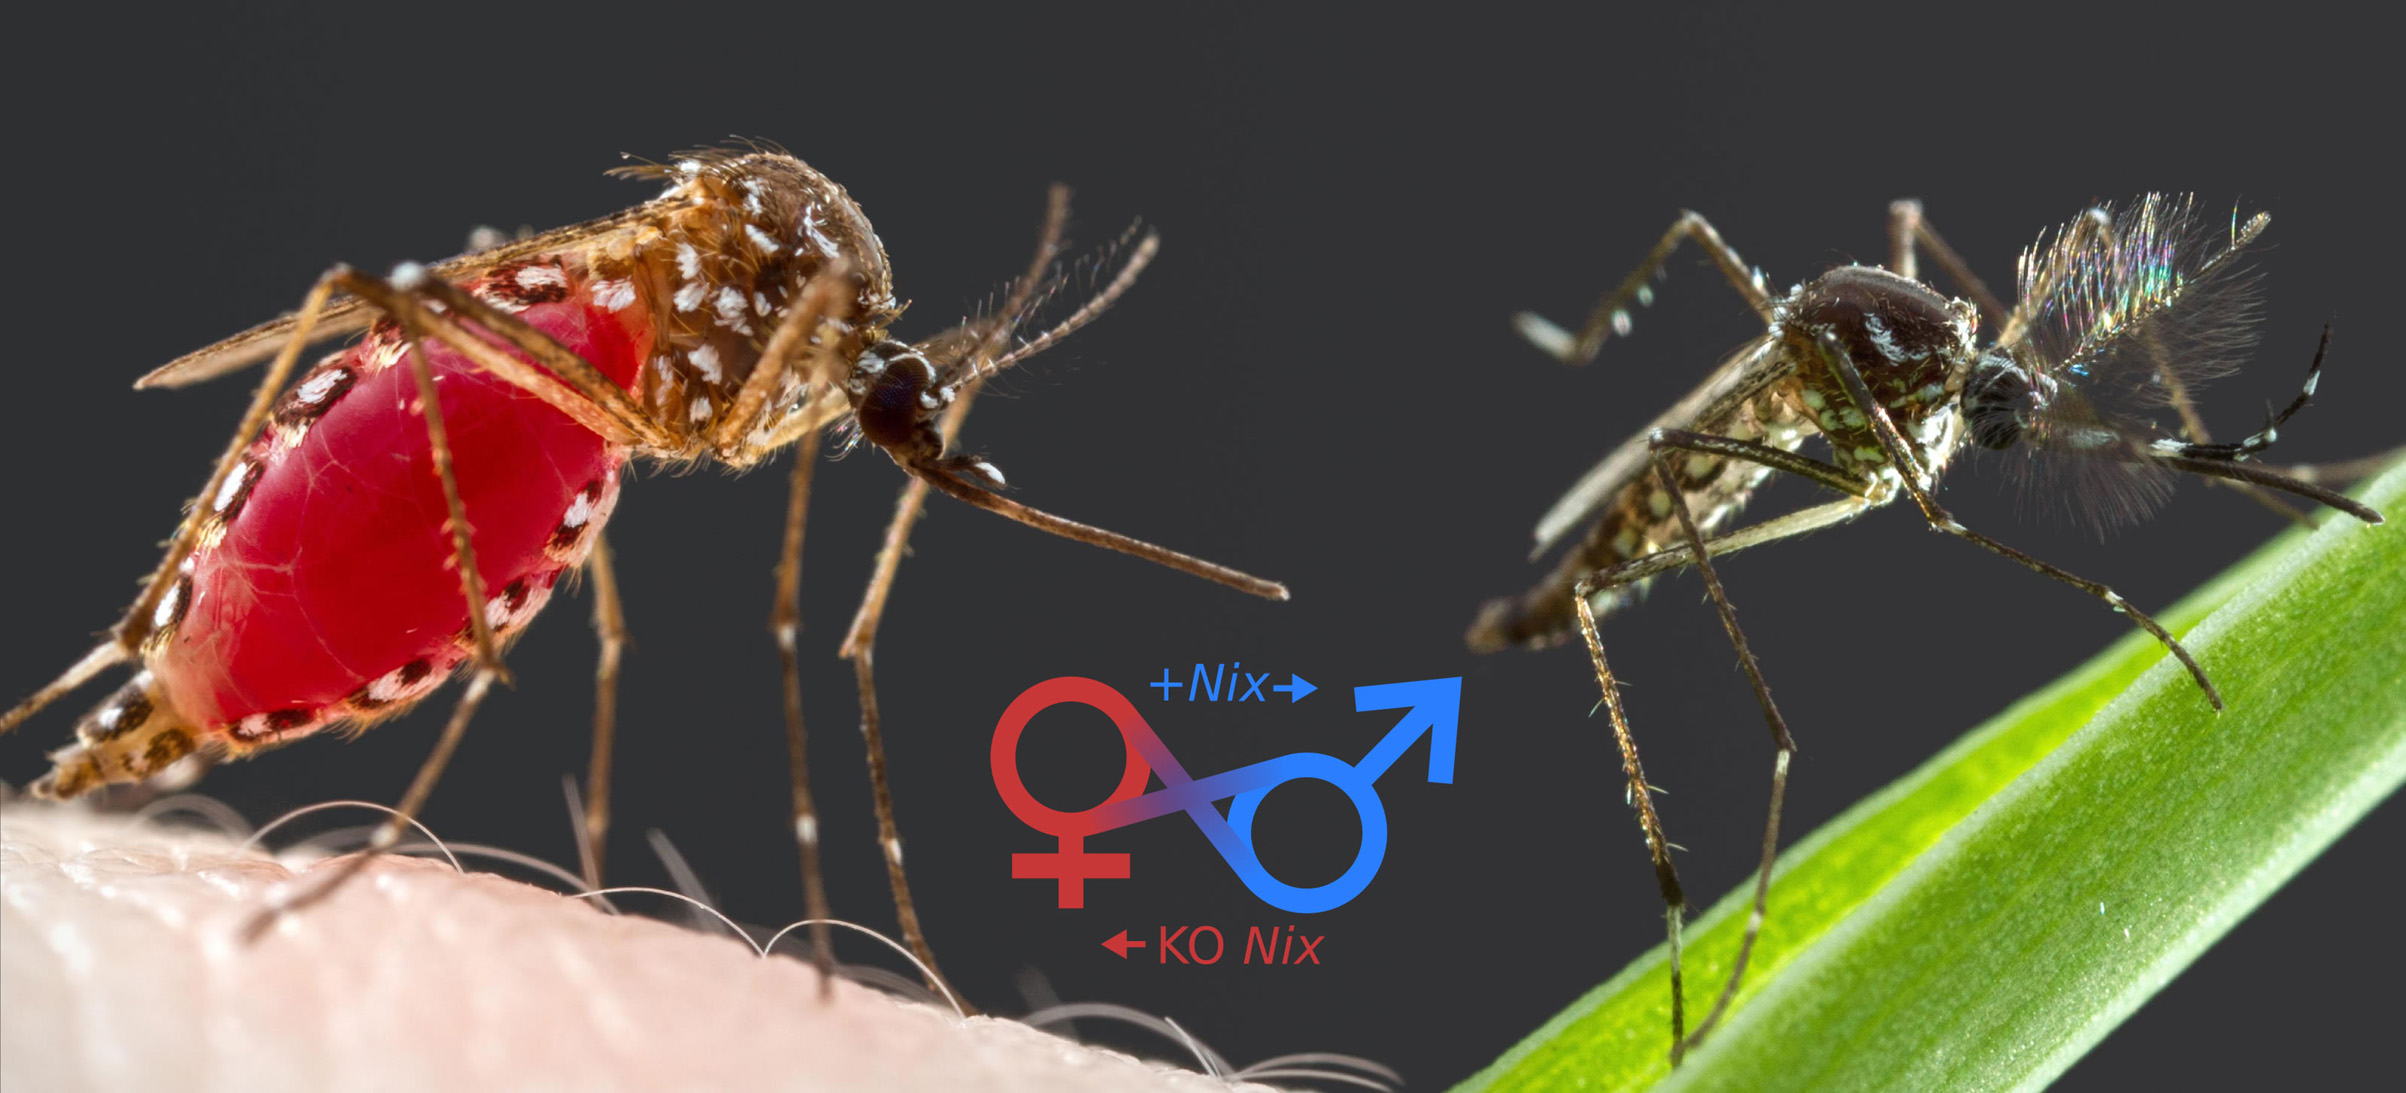 A mosquito sex-determining gene could help fight dengue fever, life ...